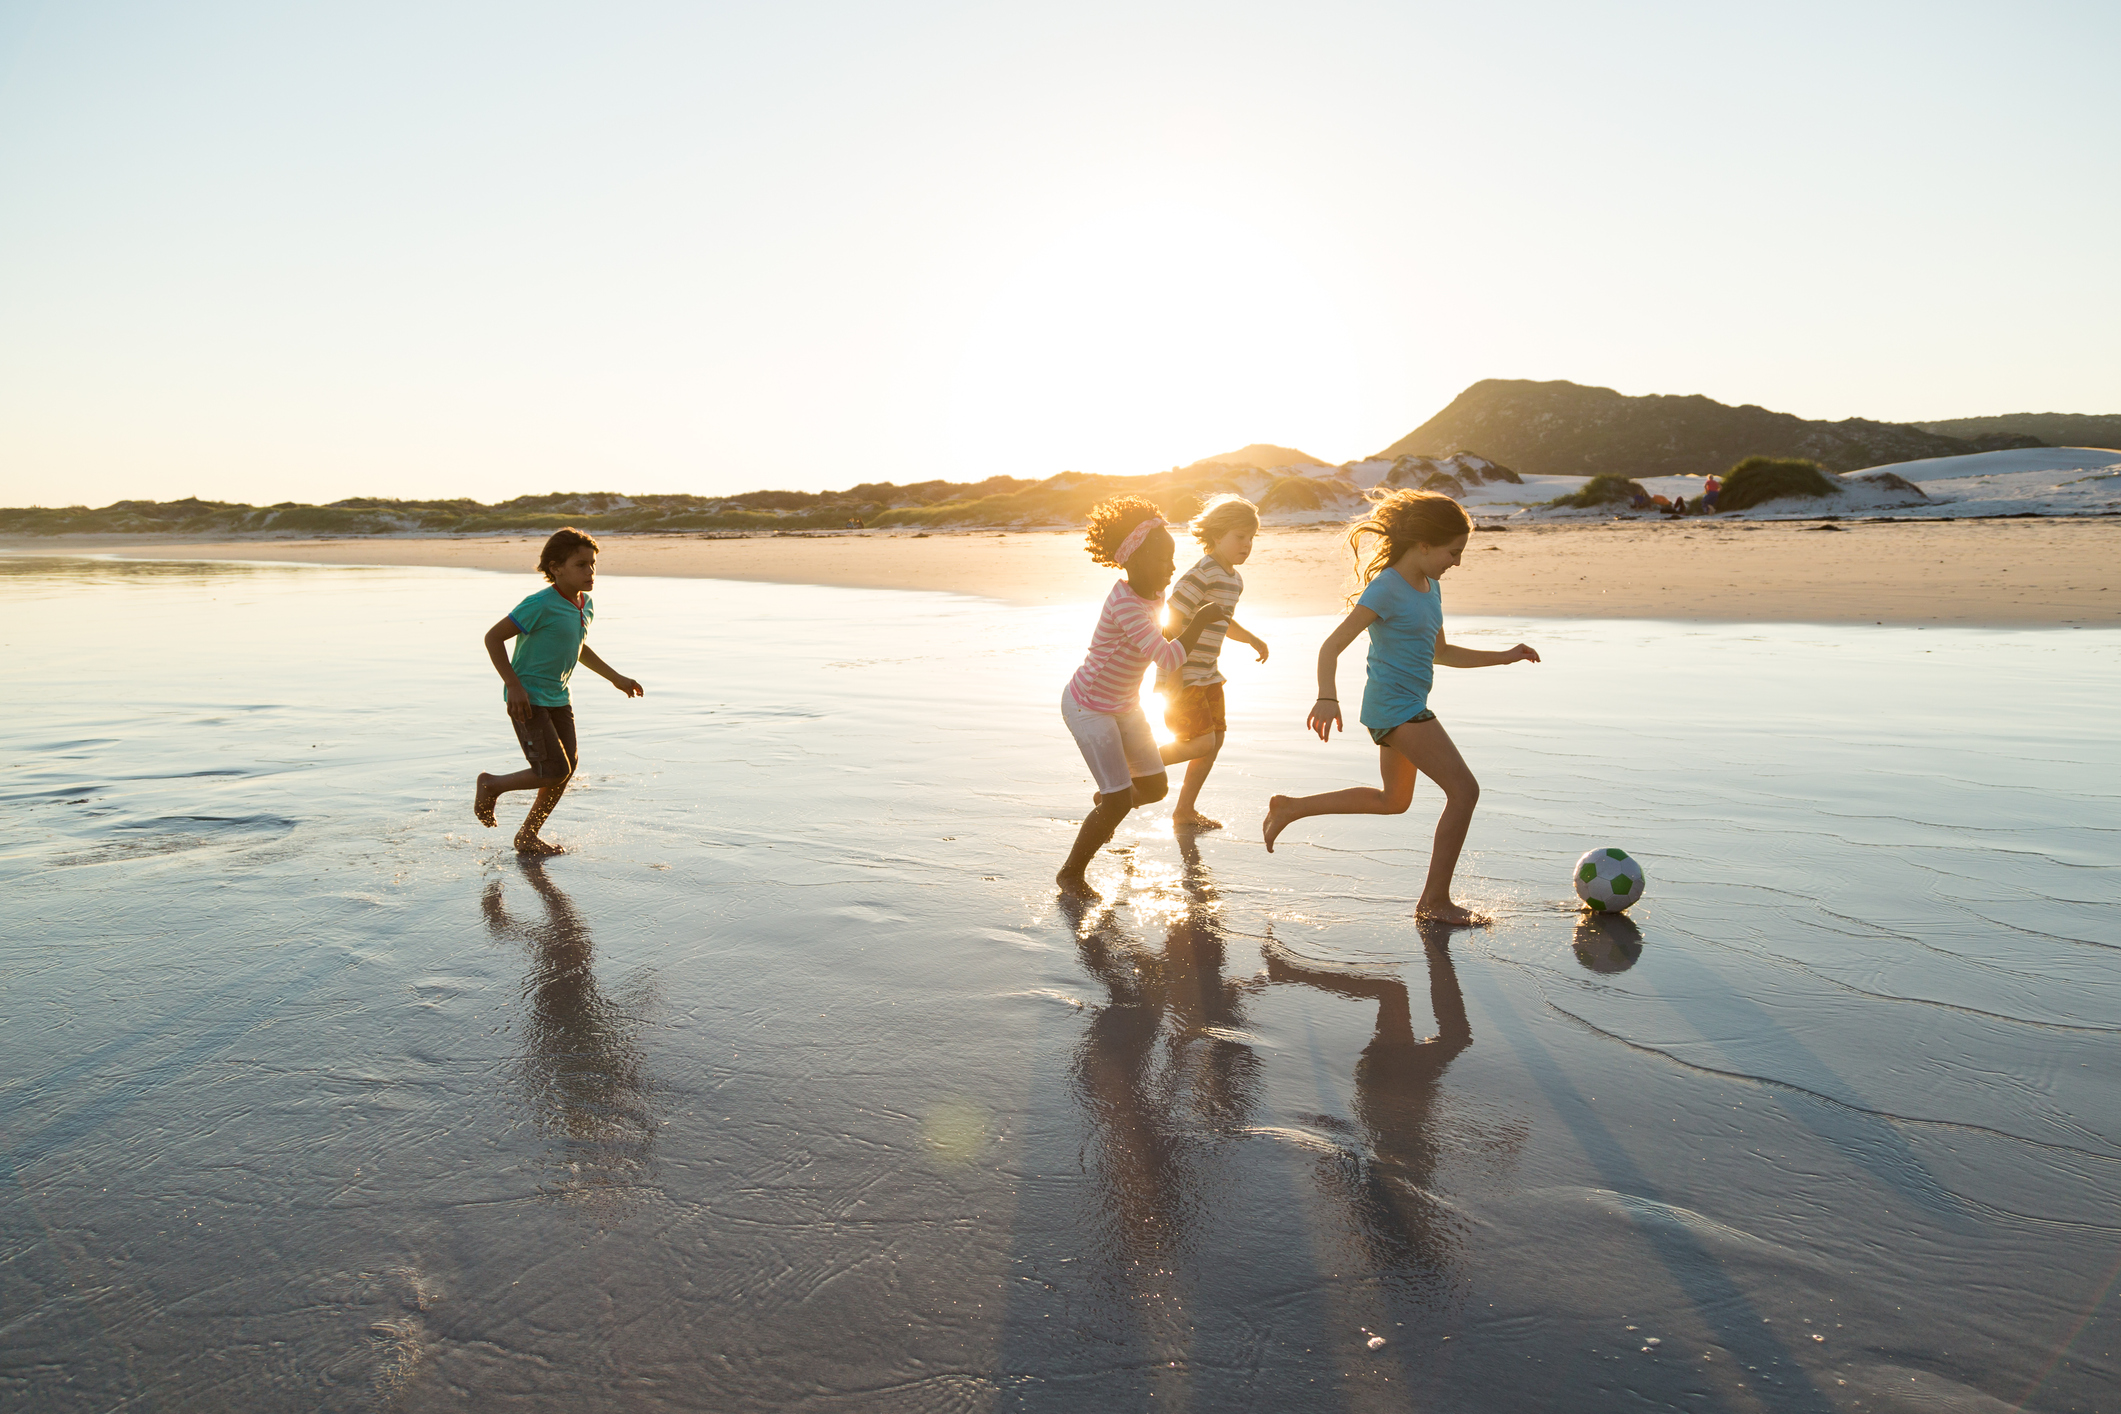 Group of children playing soccer together on a beach at sunset